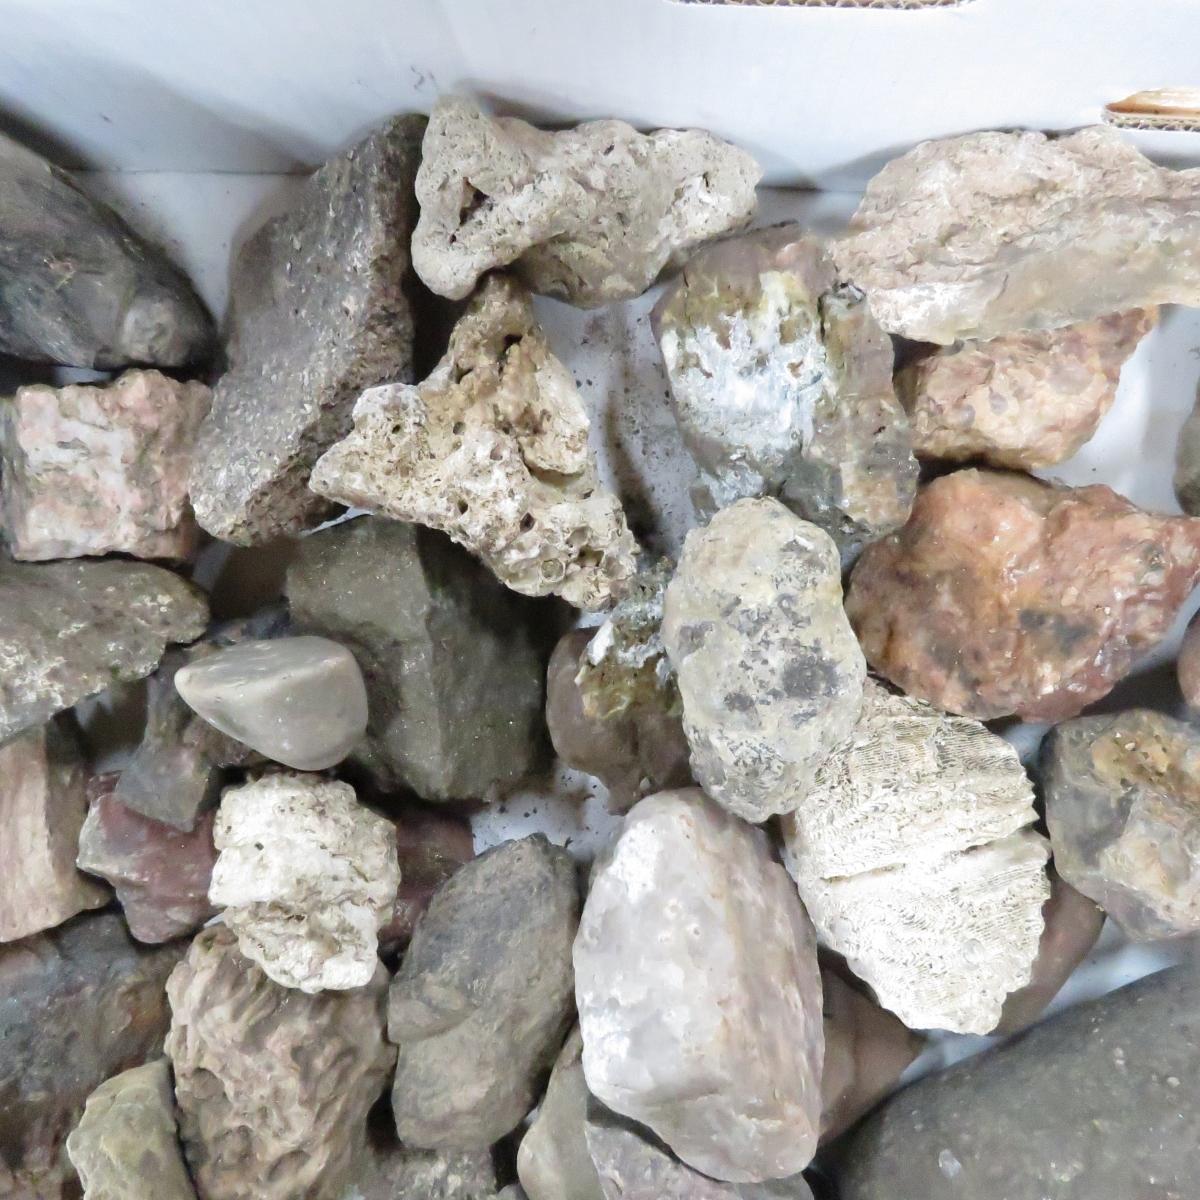 40+ pounds mixed rocks and minerals